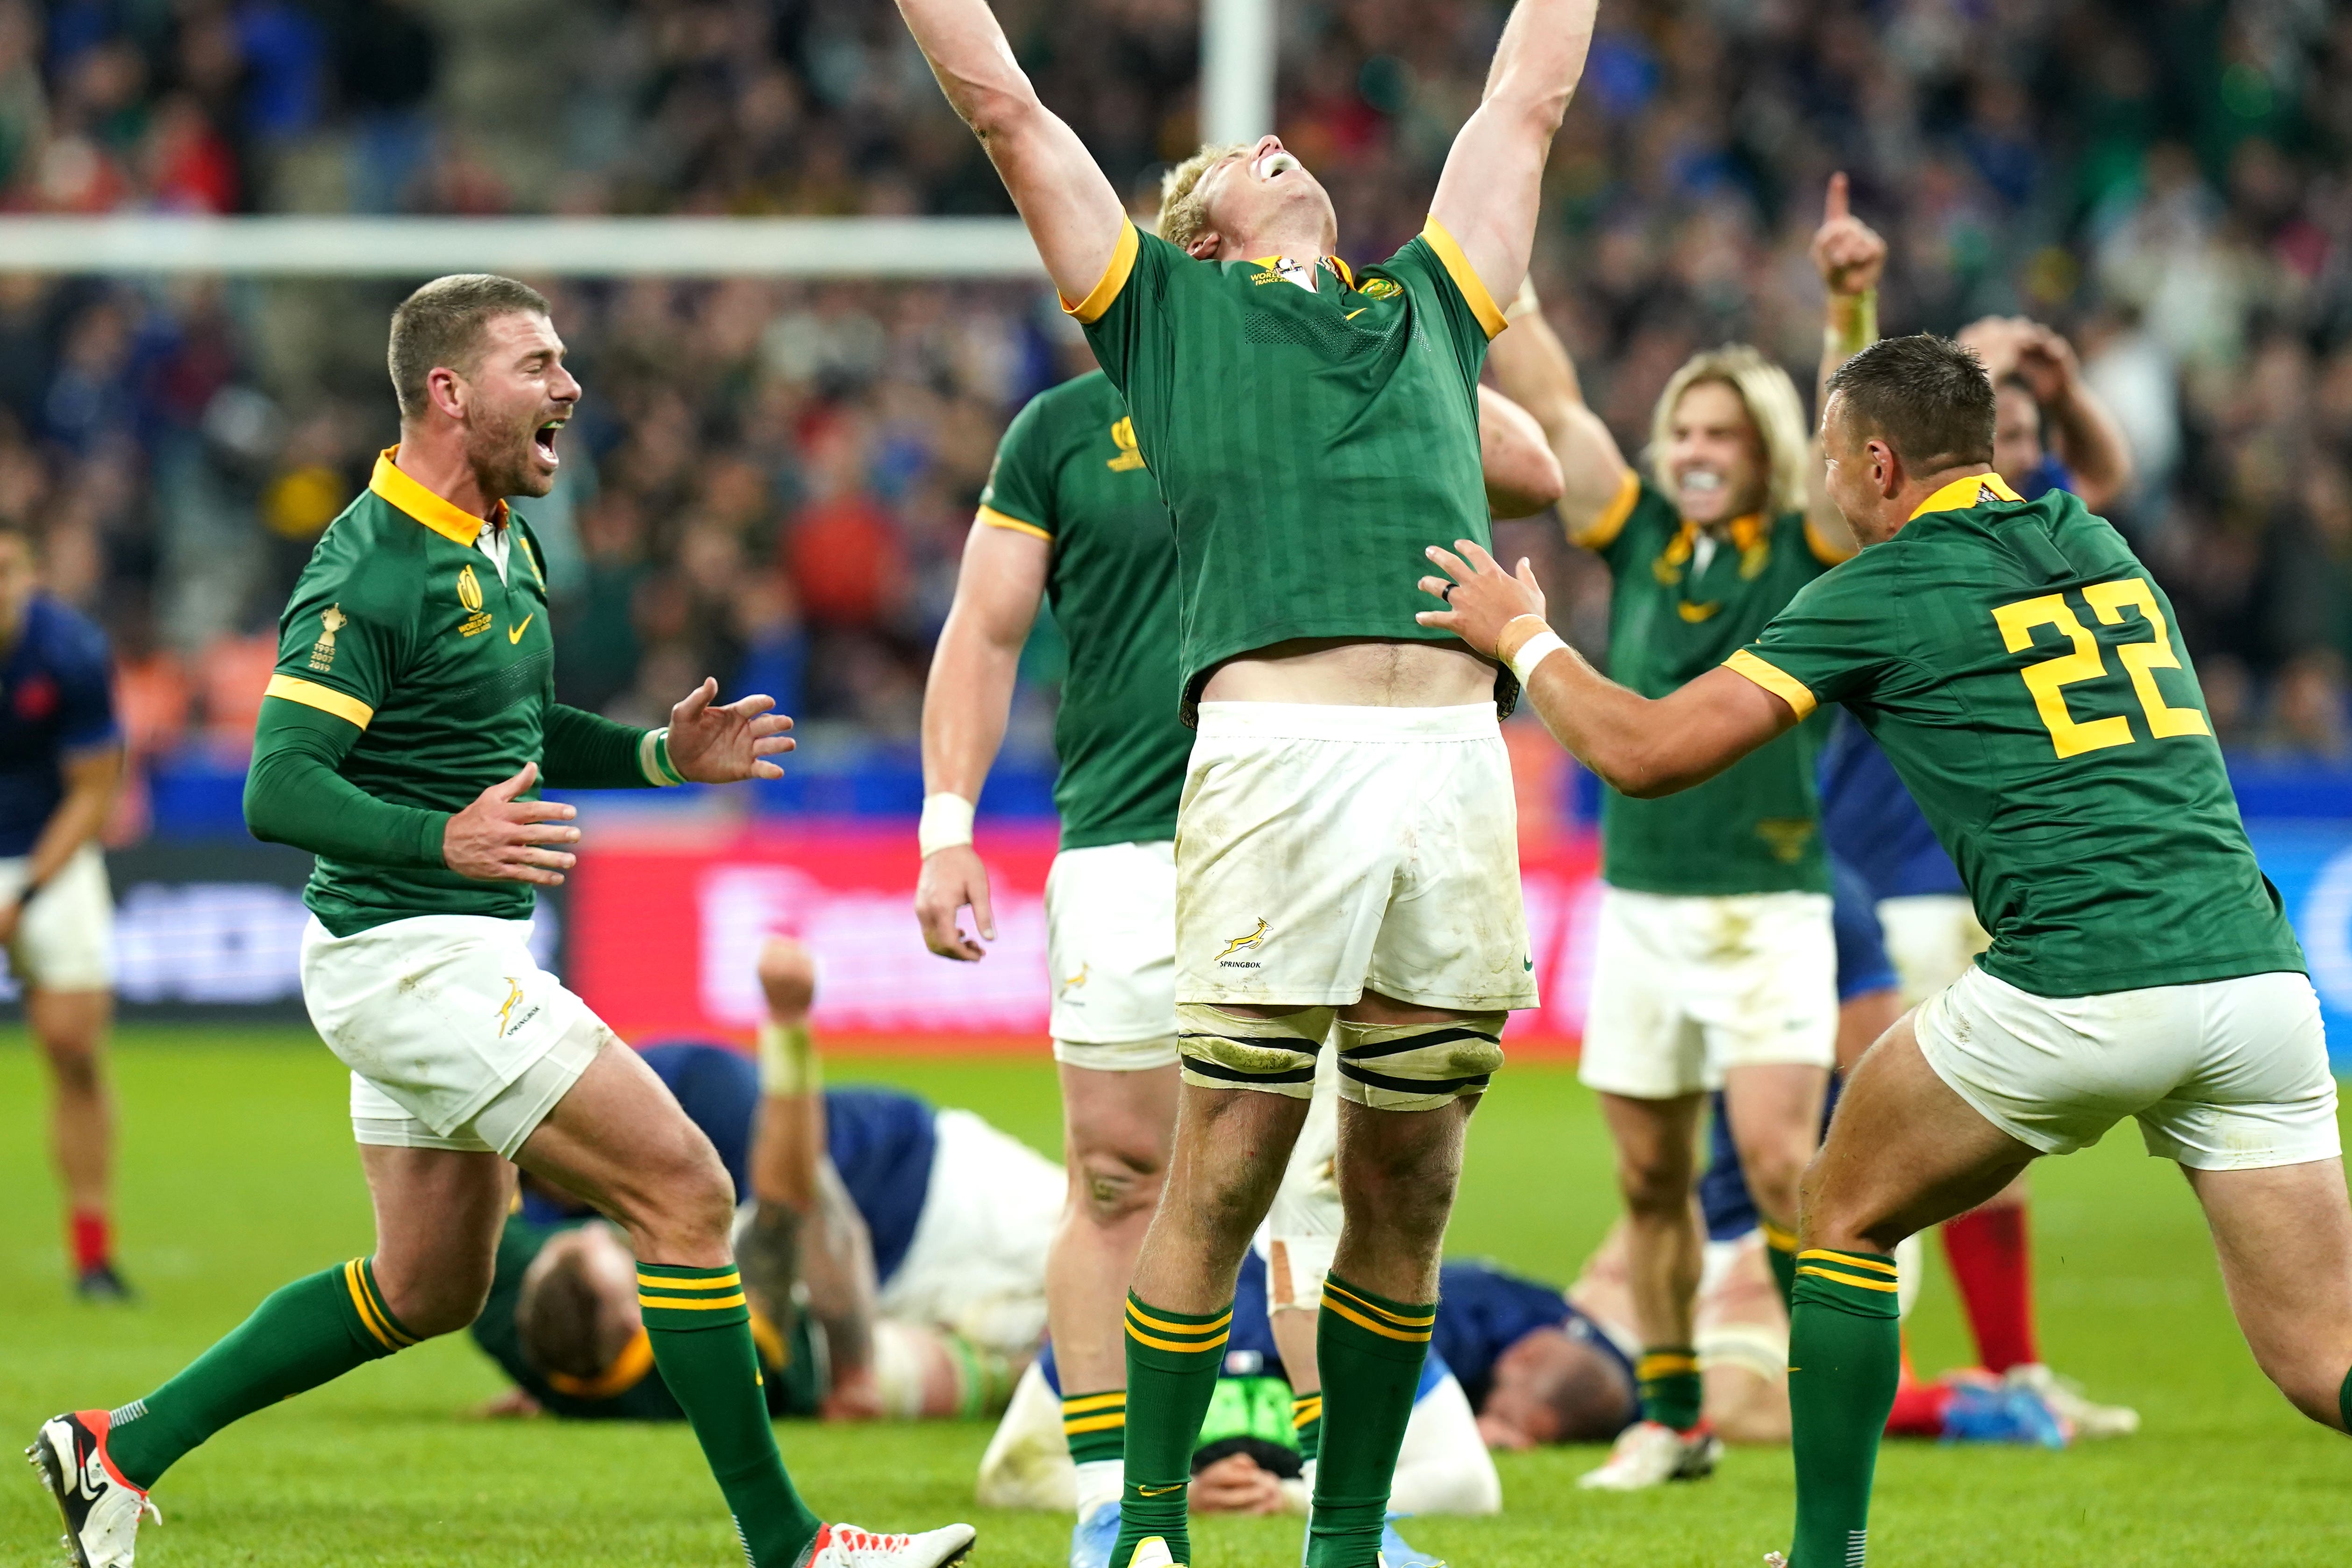 Holders South Africa reached the semi-finals with a brilliant win over France